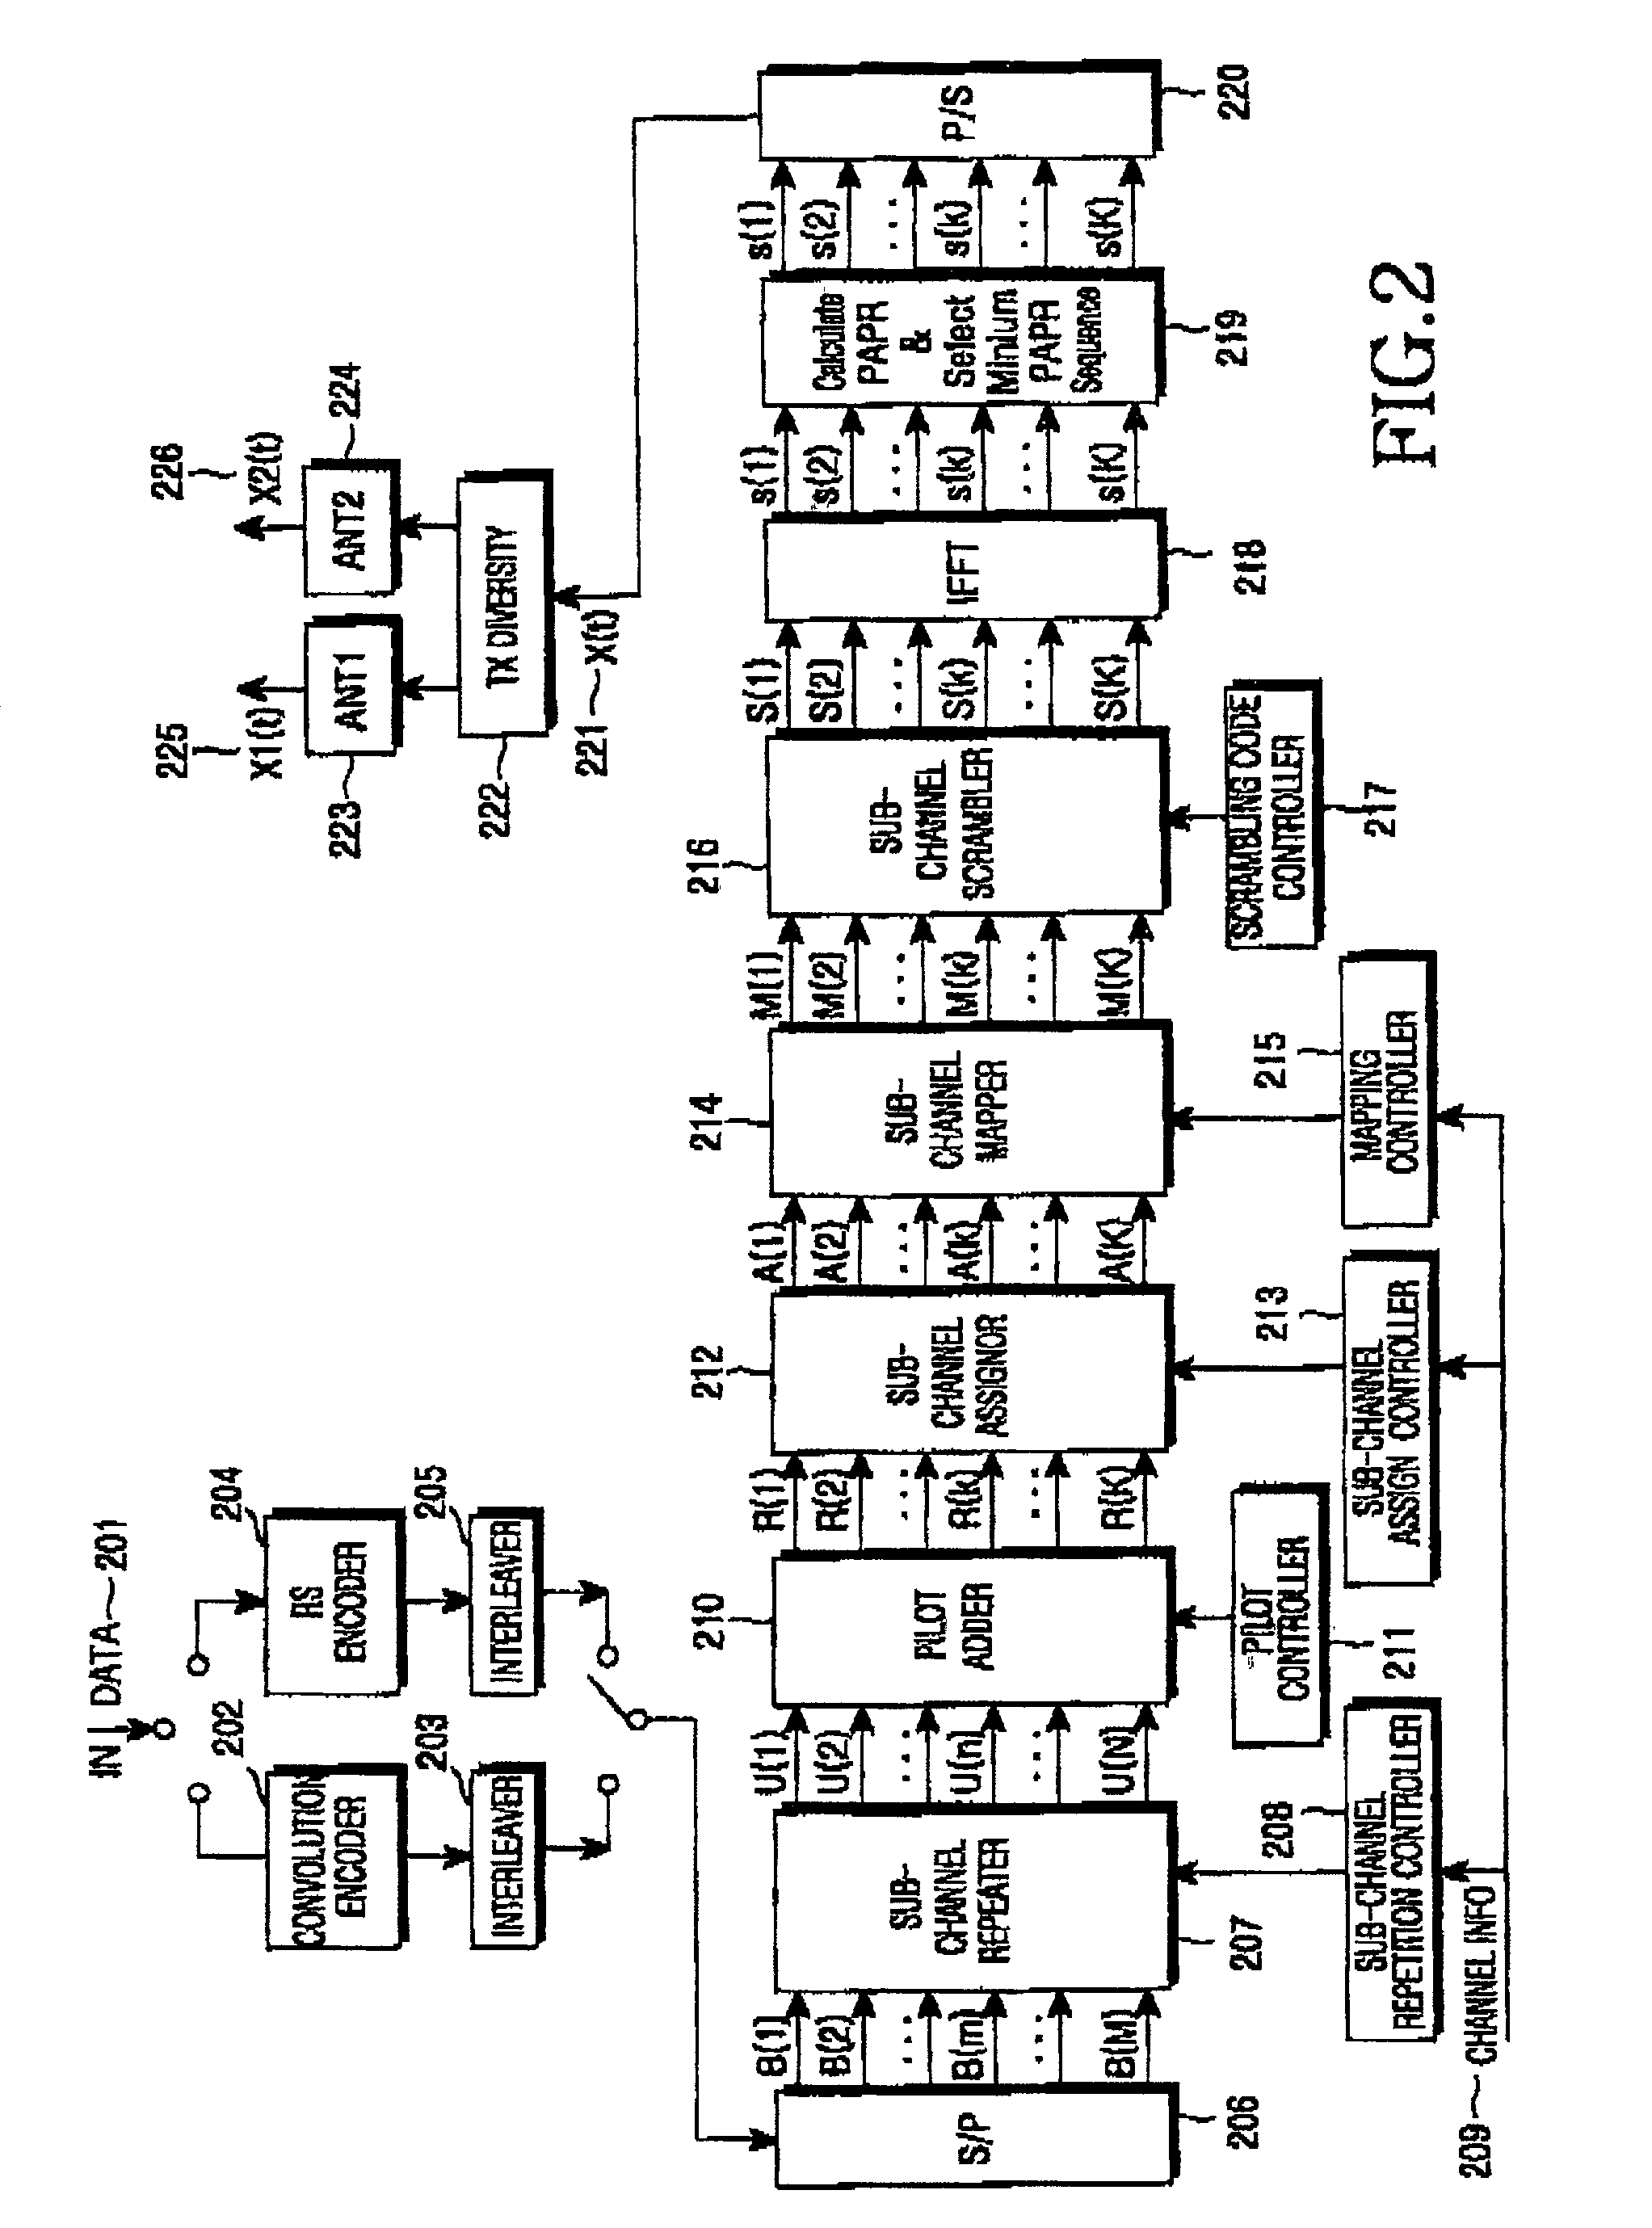 Orthogonal frequency division multiplexing/modulation communication system for improving ability of data transmission and method thereof